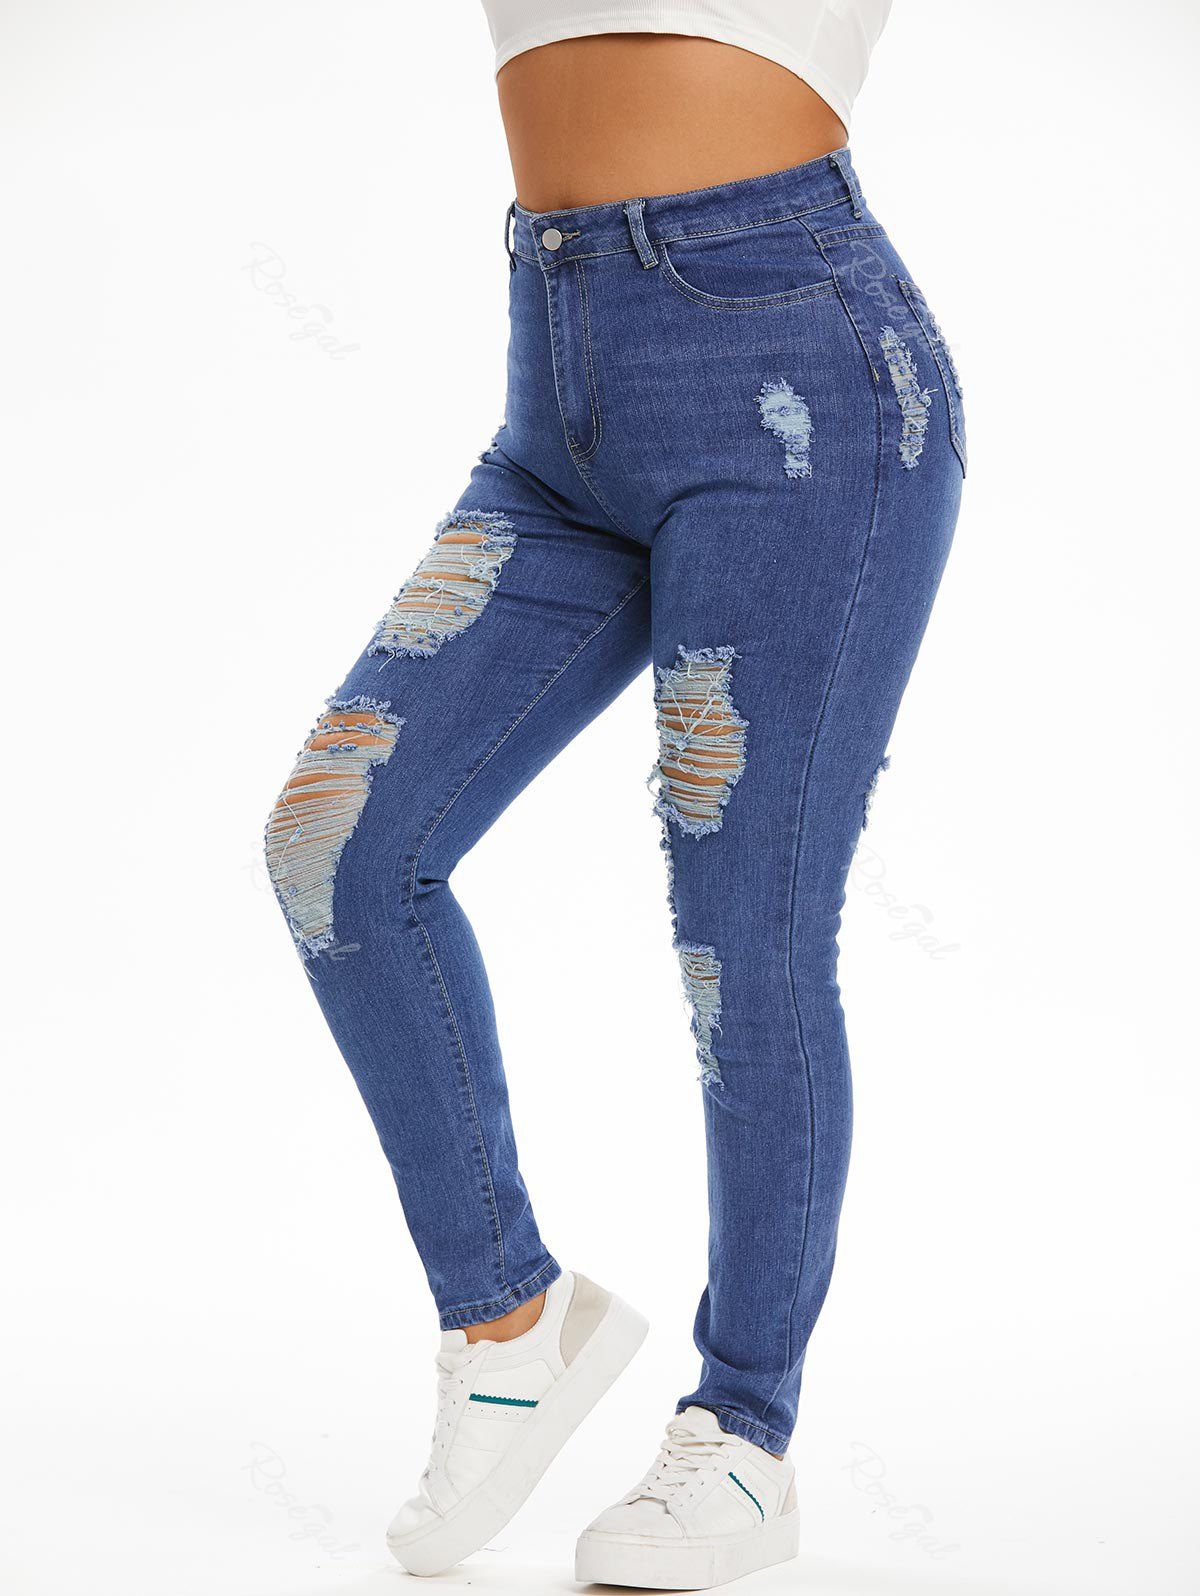 Chic Plus Size&Curve Skinny Distressed Destroyed Jeans  